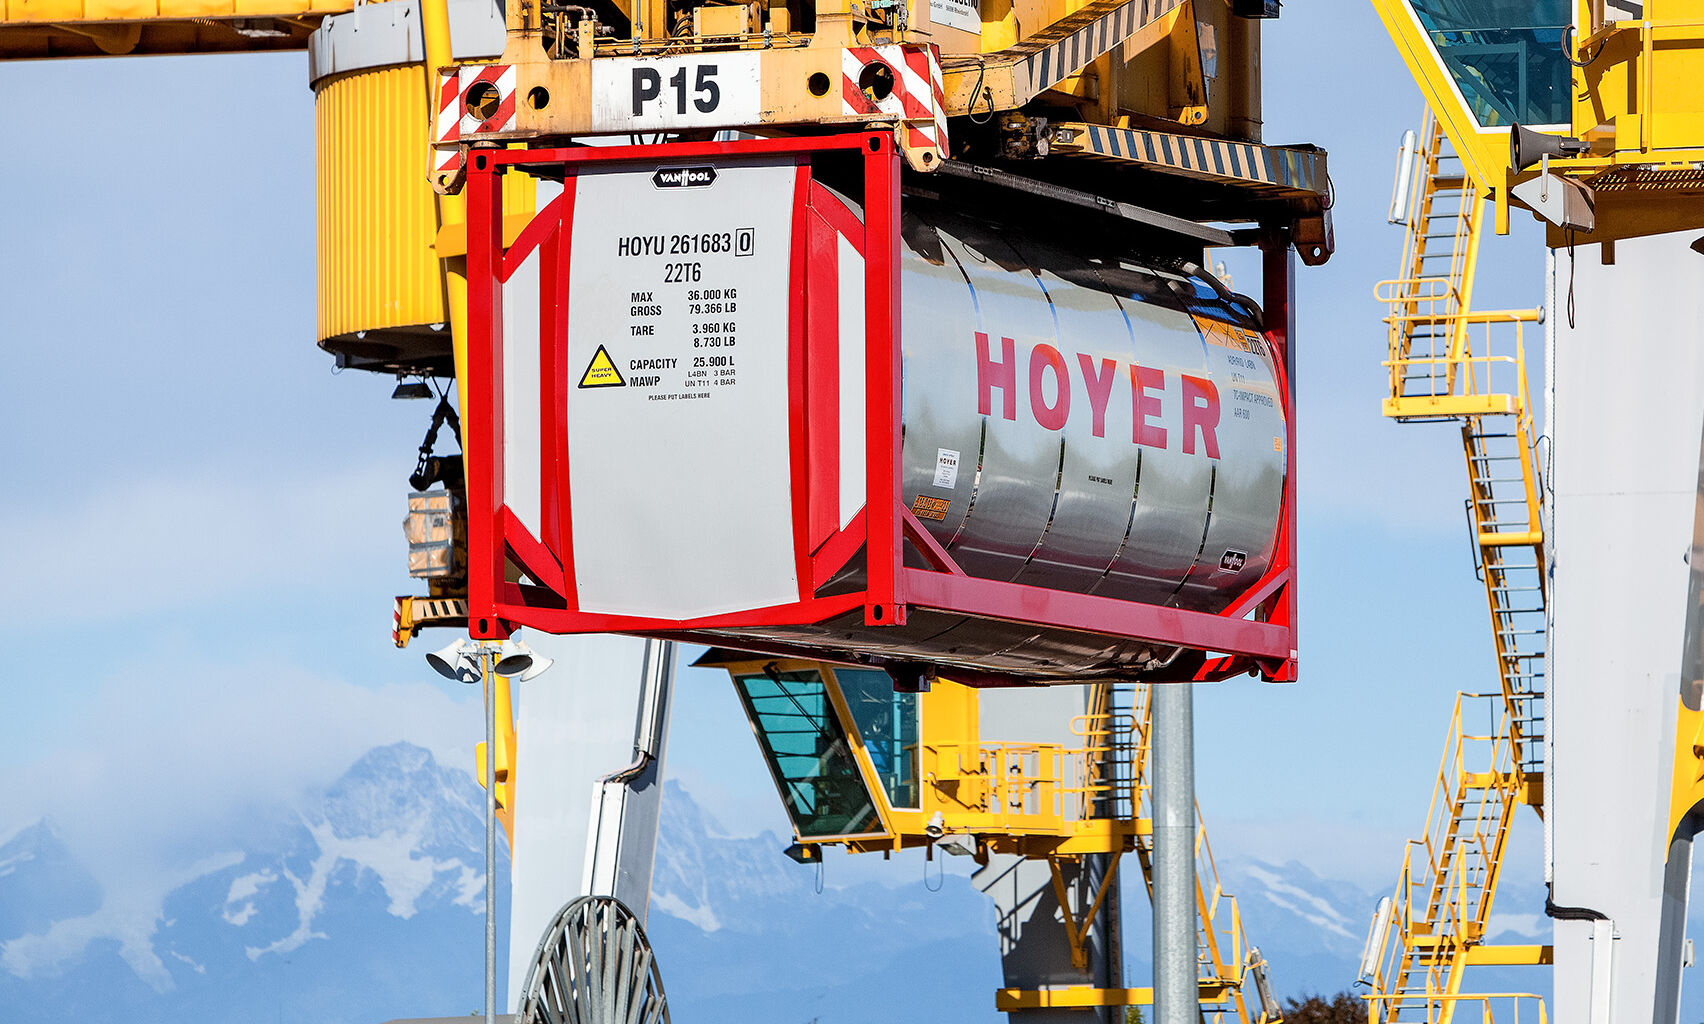 HOYER Group tank container Italy, loading and unloading